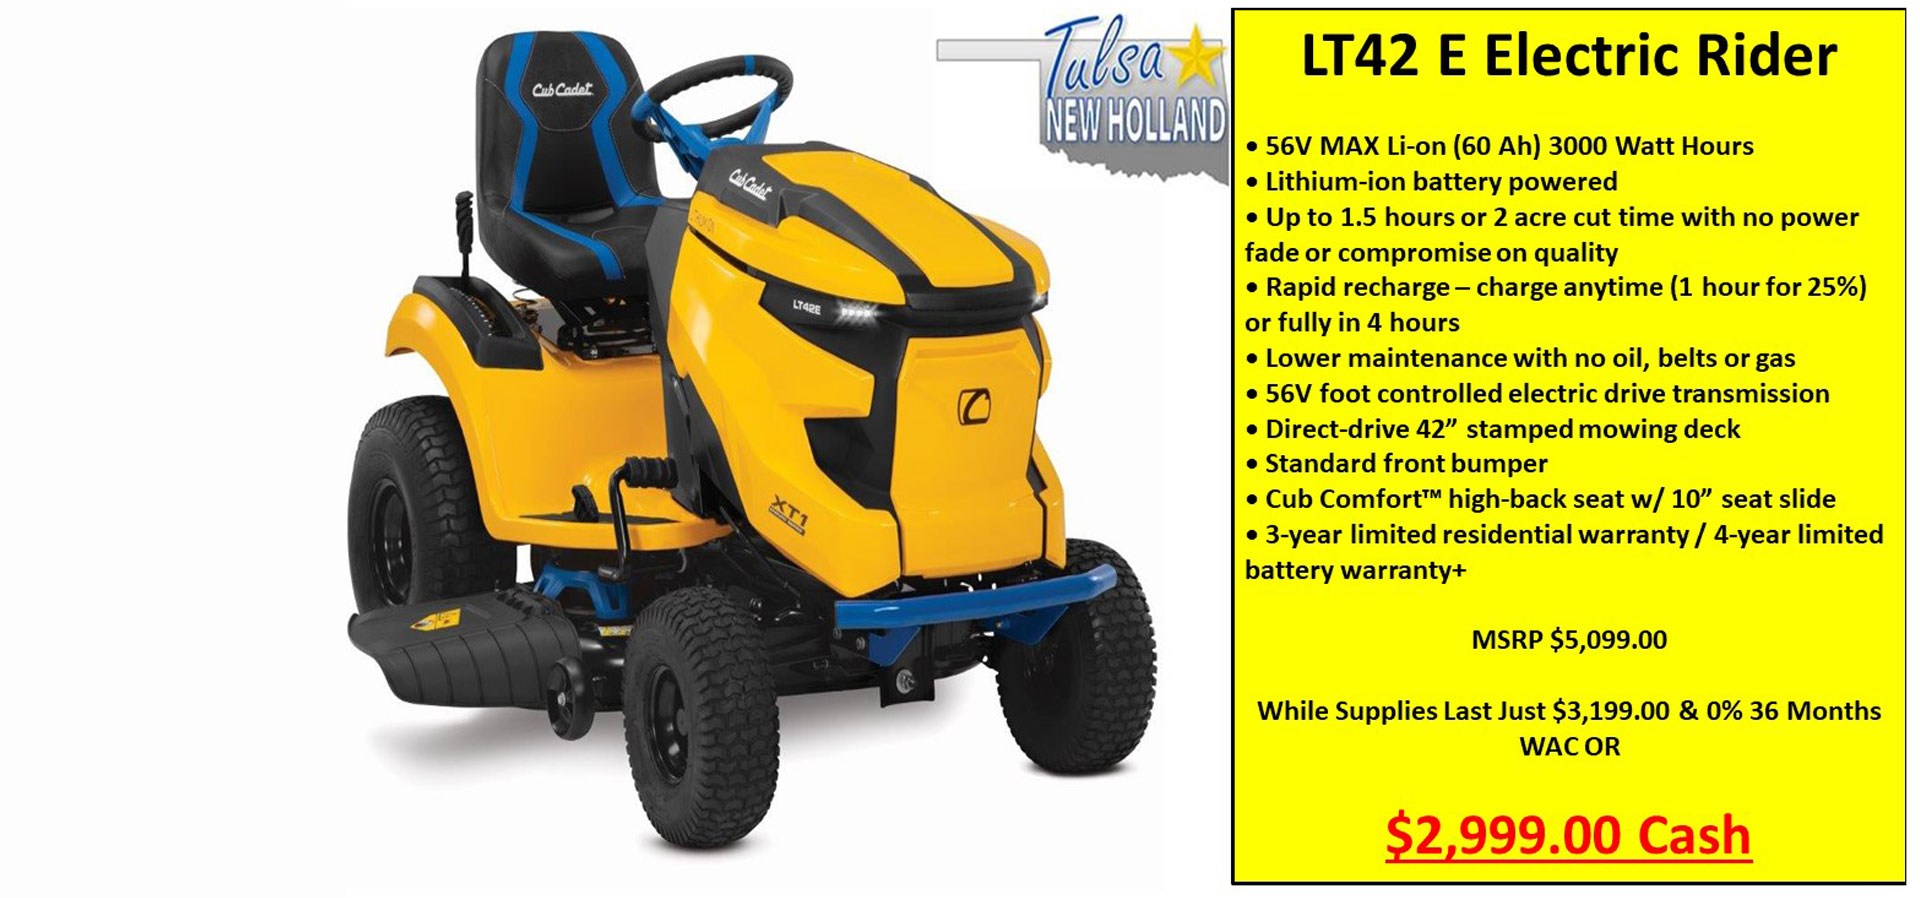 Tulsa New Holland, INC - LT42 E Electric Rider - Special Financing And Cash Price Offer